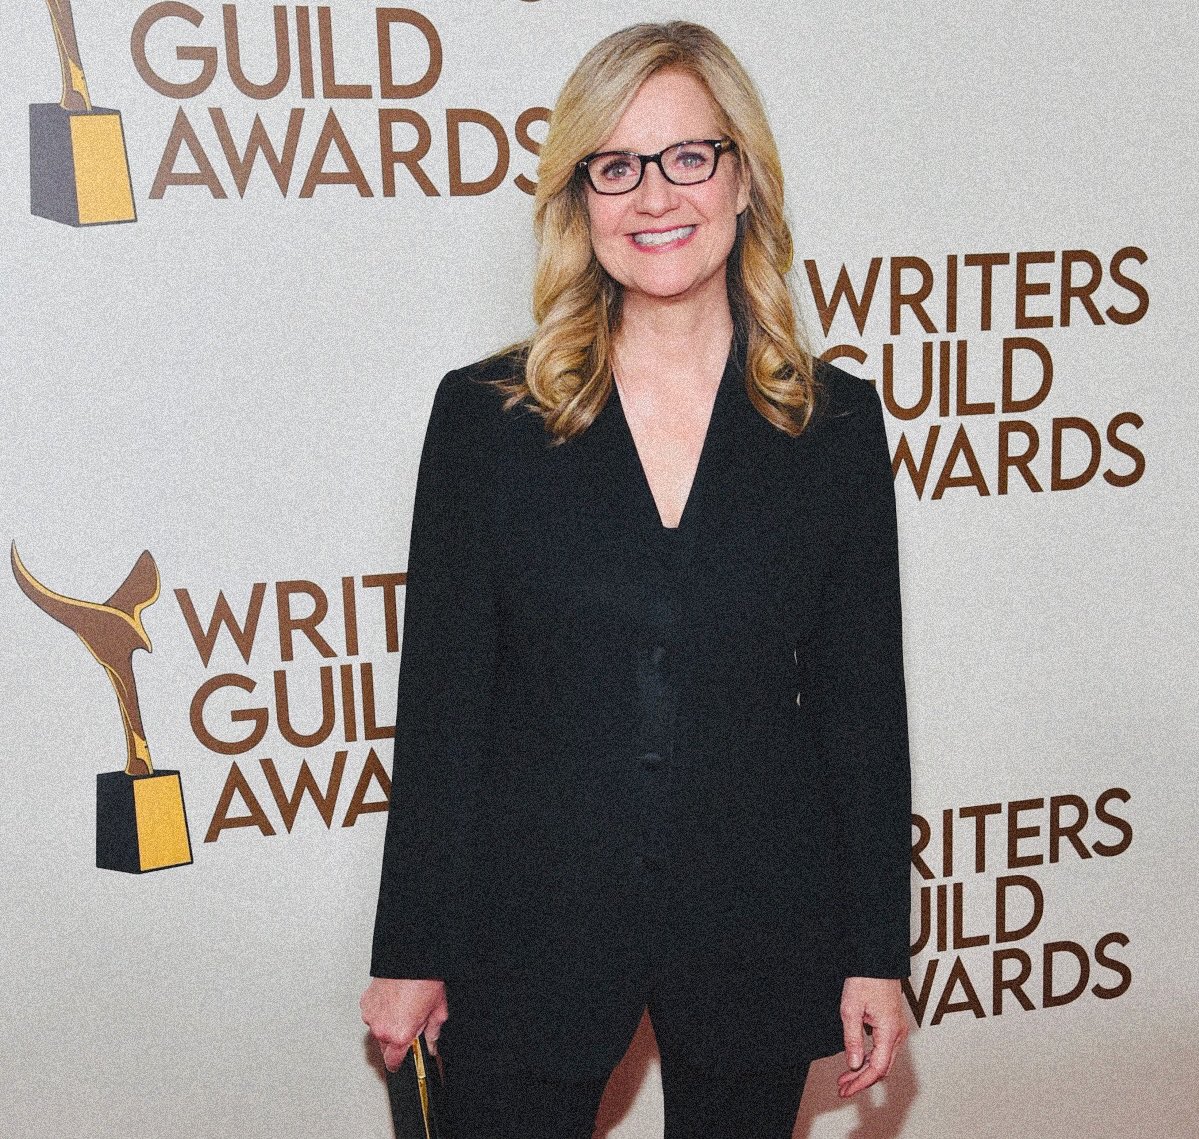 Bonnie recently attended the Writers Guild Awards in New York City! She was nominated for writing the Pilot of “Amber Brown”! I love the recognition she’s getting for this wonderful show! 📸Steward Cook